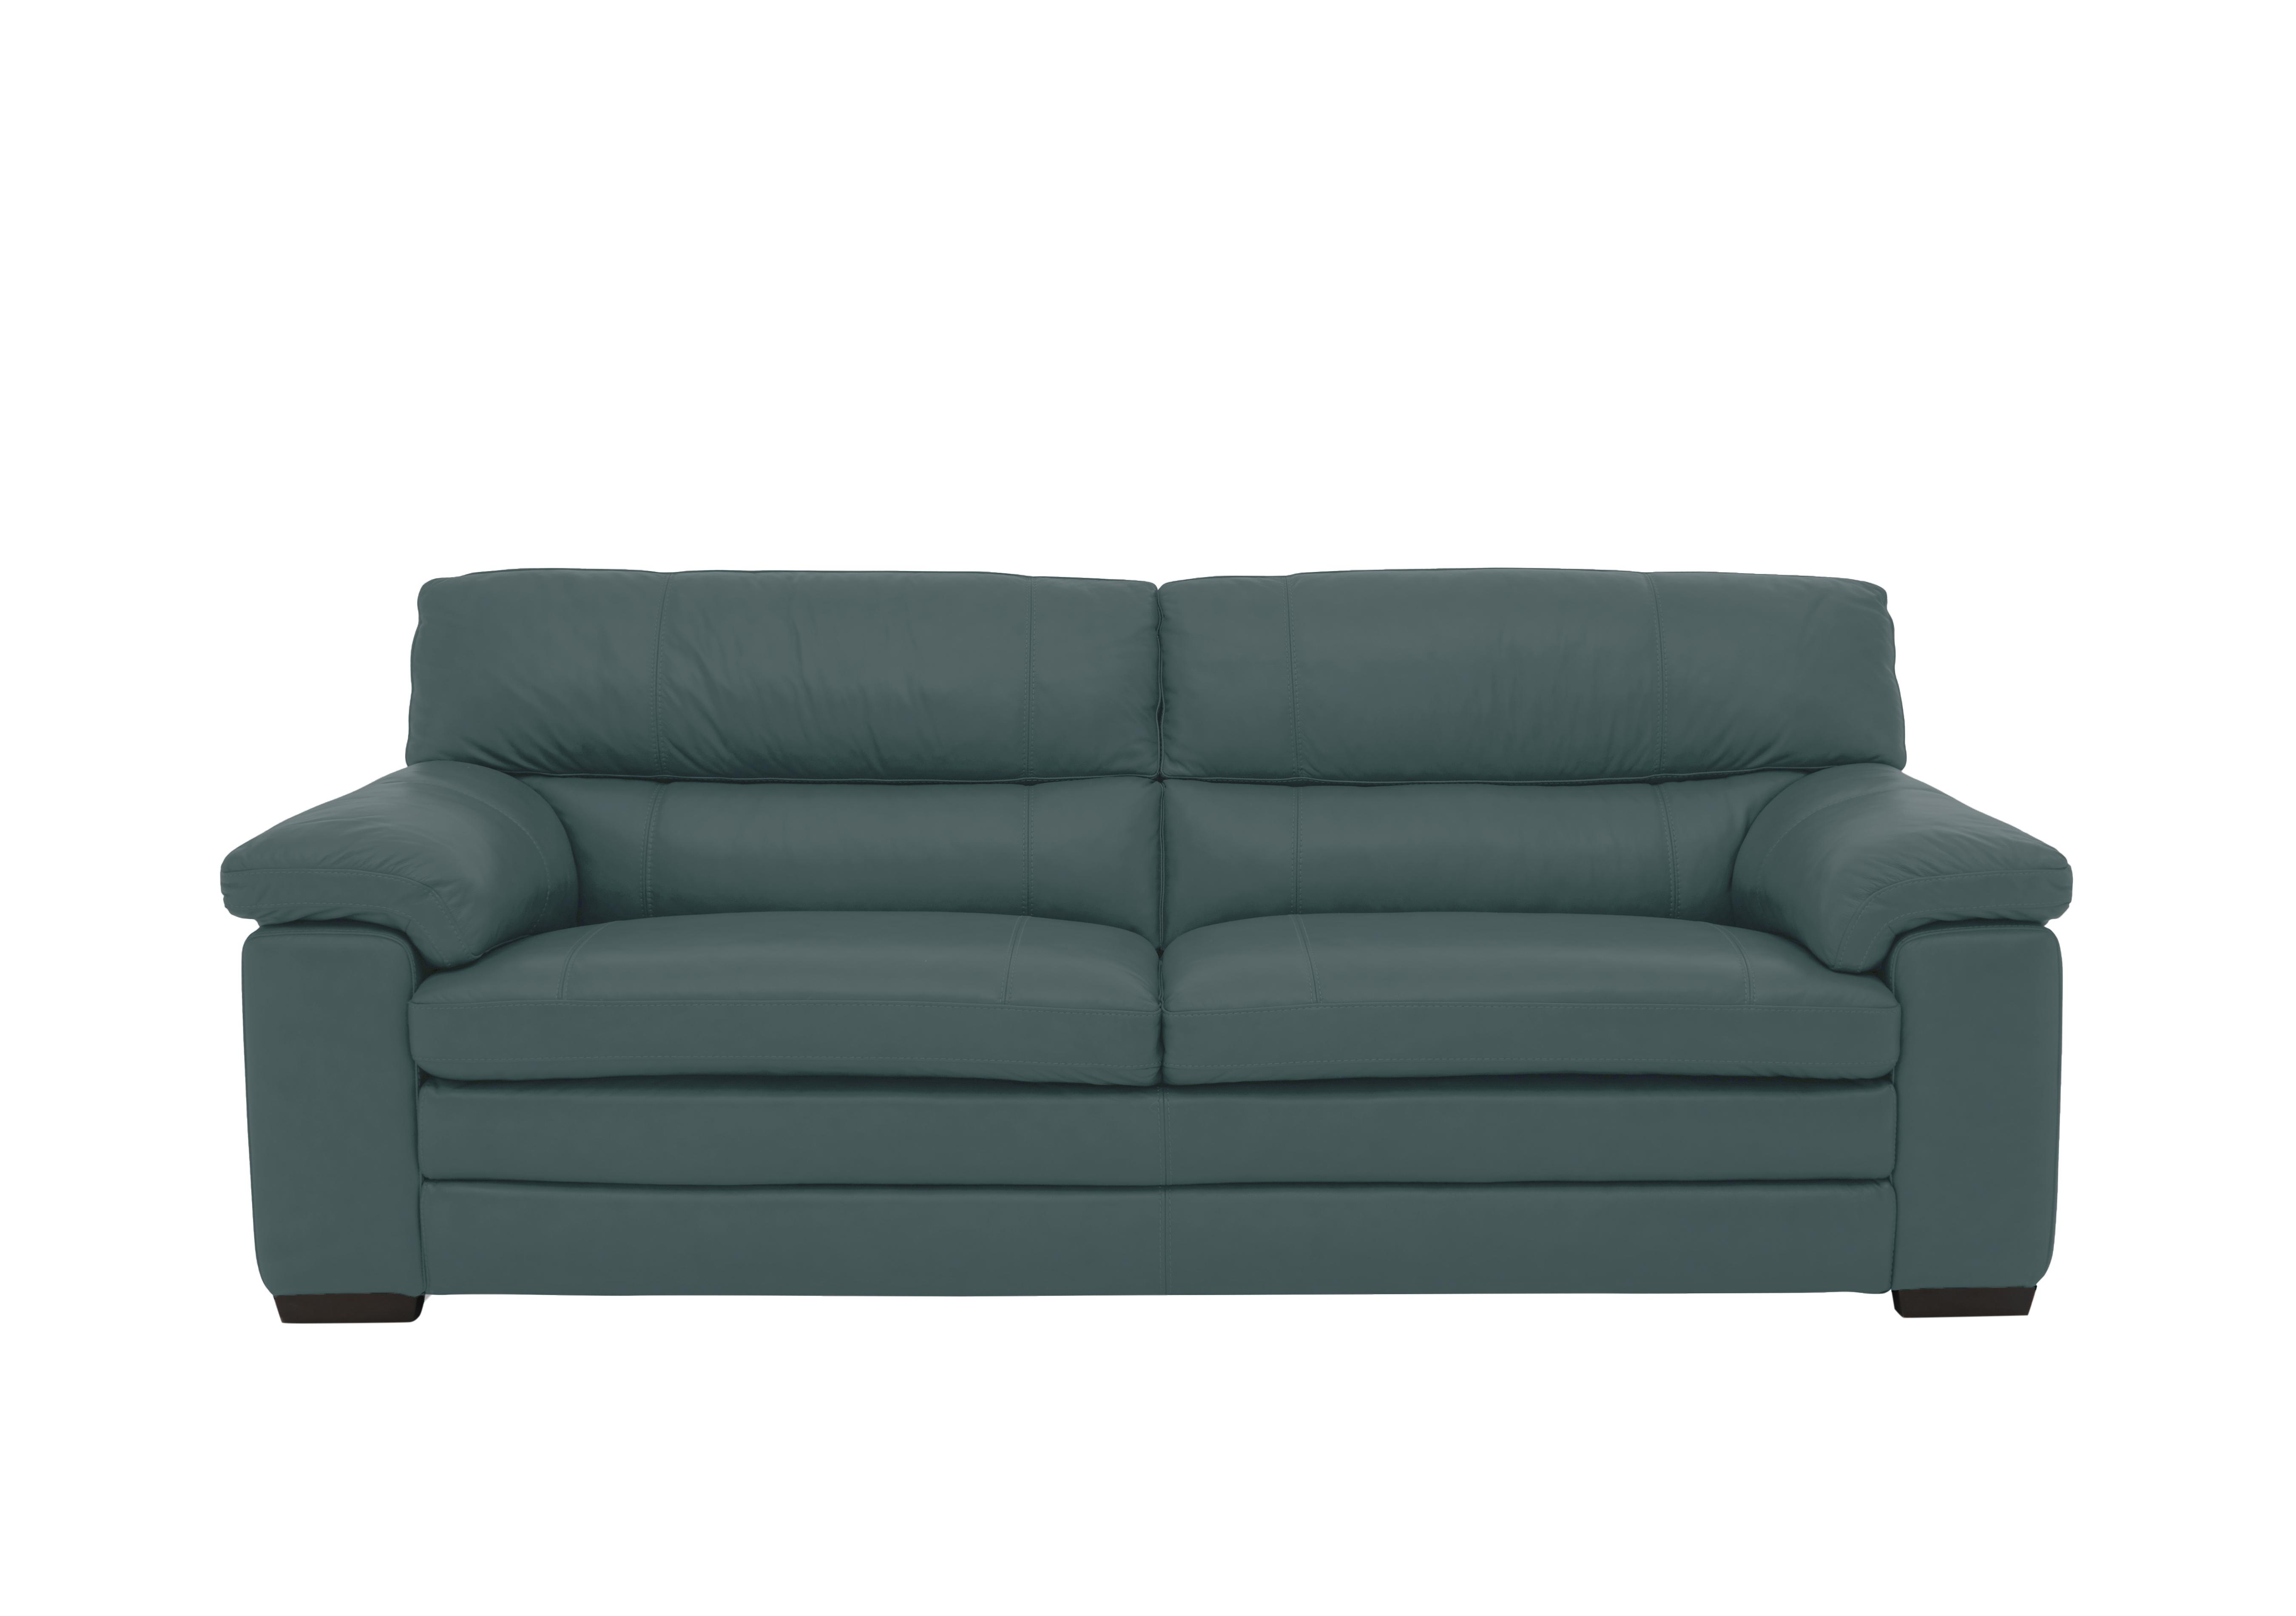 Cozee 3 Seater Pure Premium Leather Sofa in Bv-301e Lake Green on Furniture Village